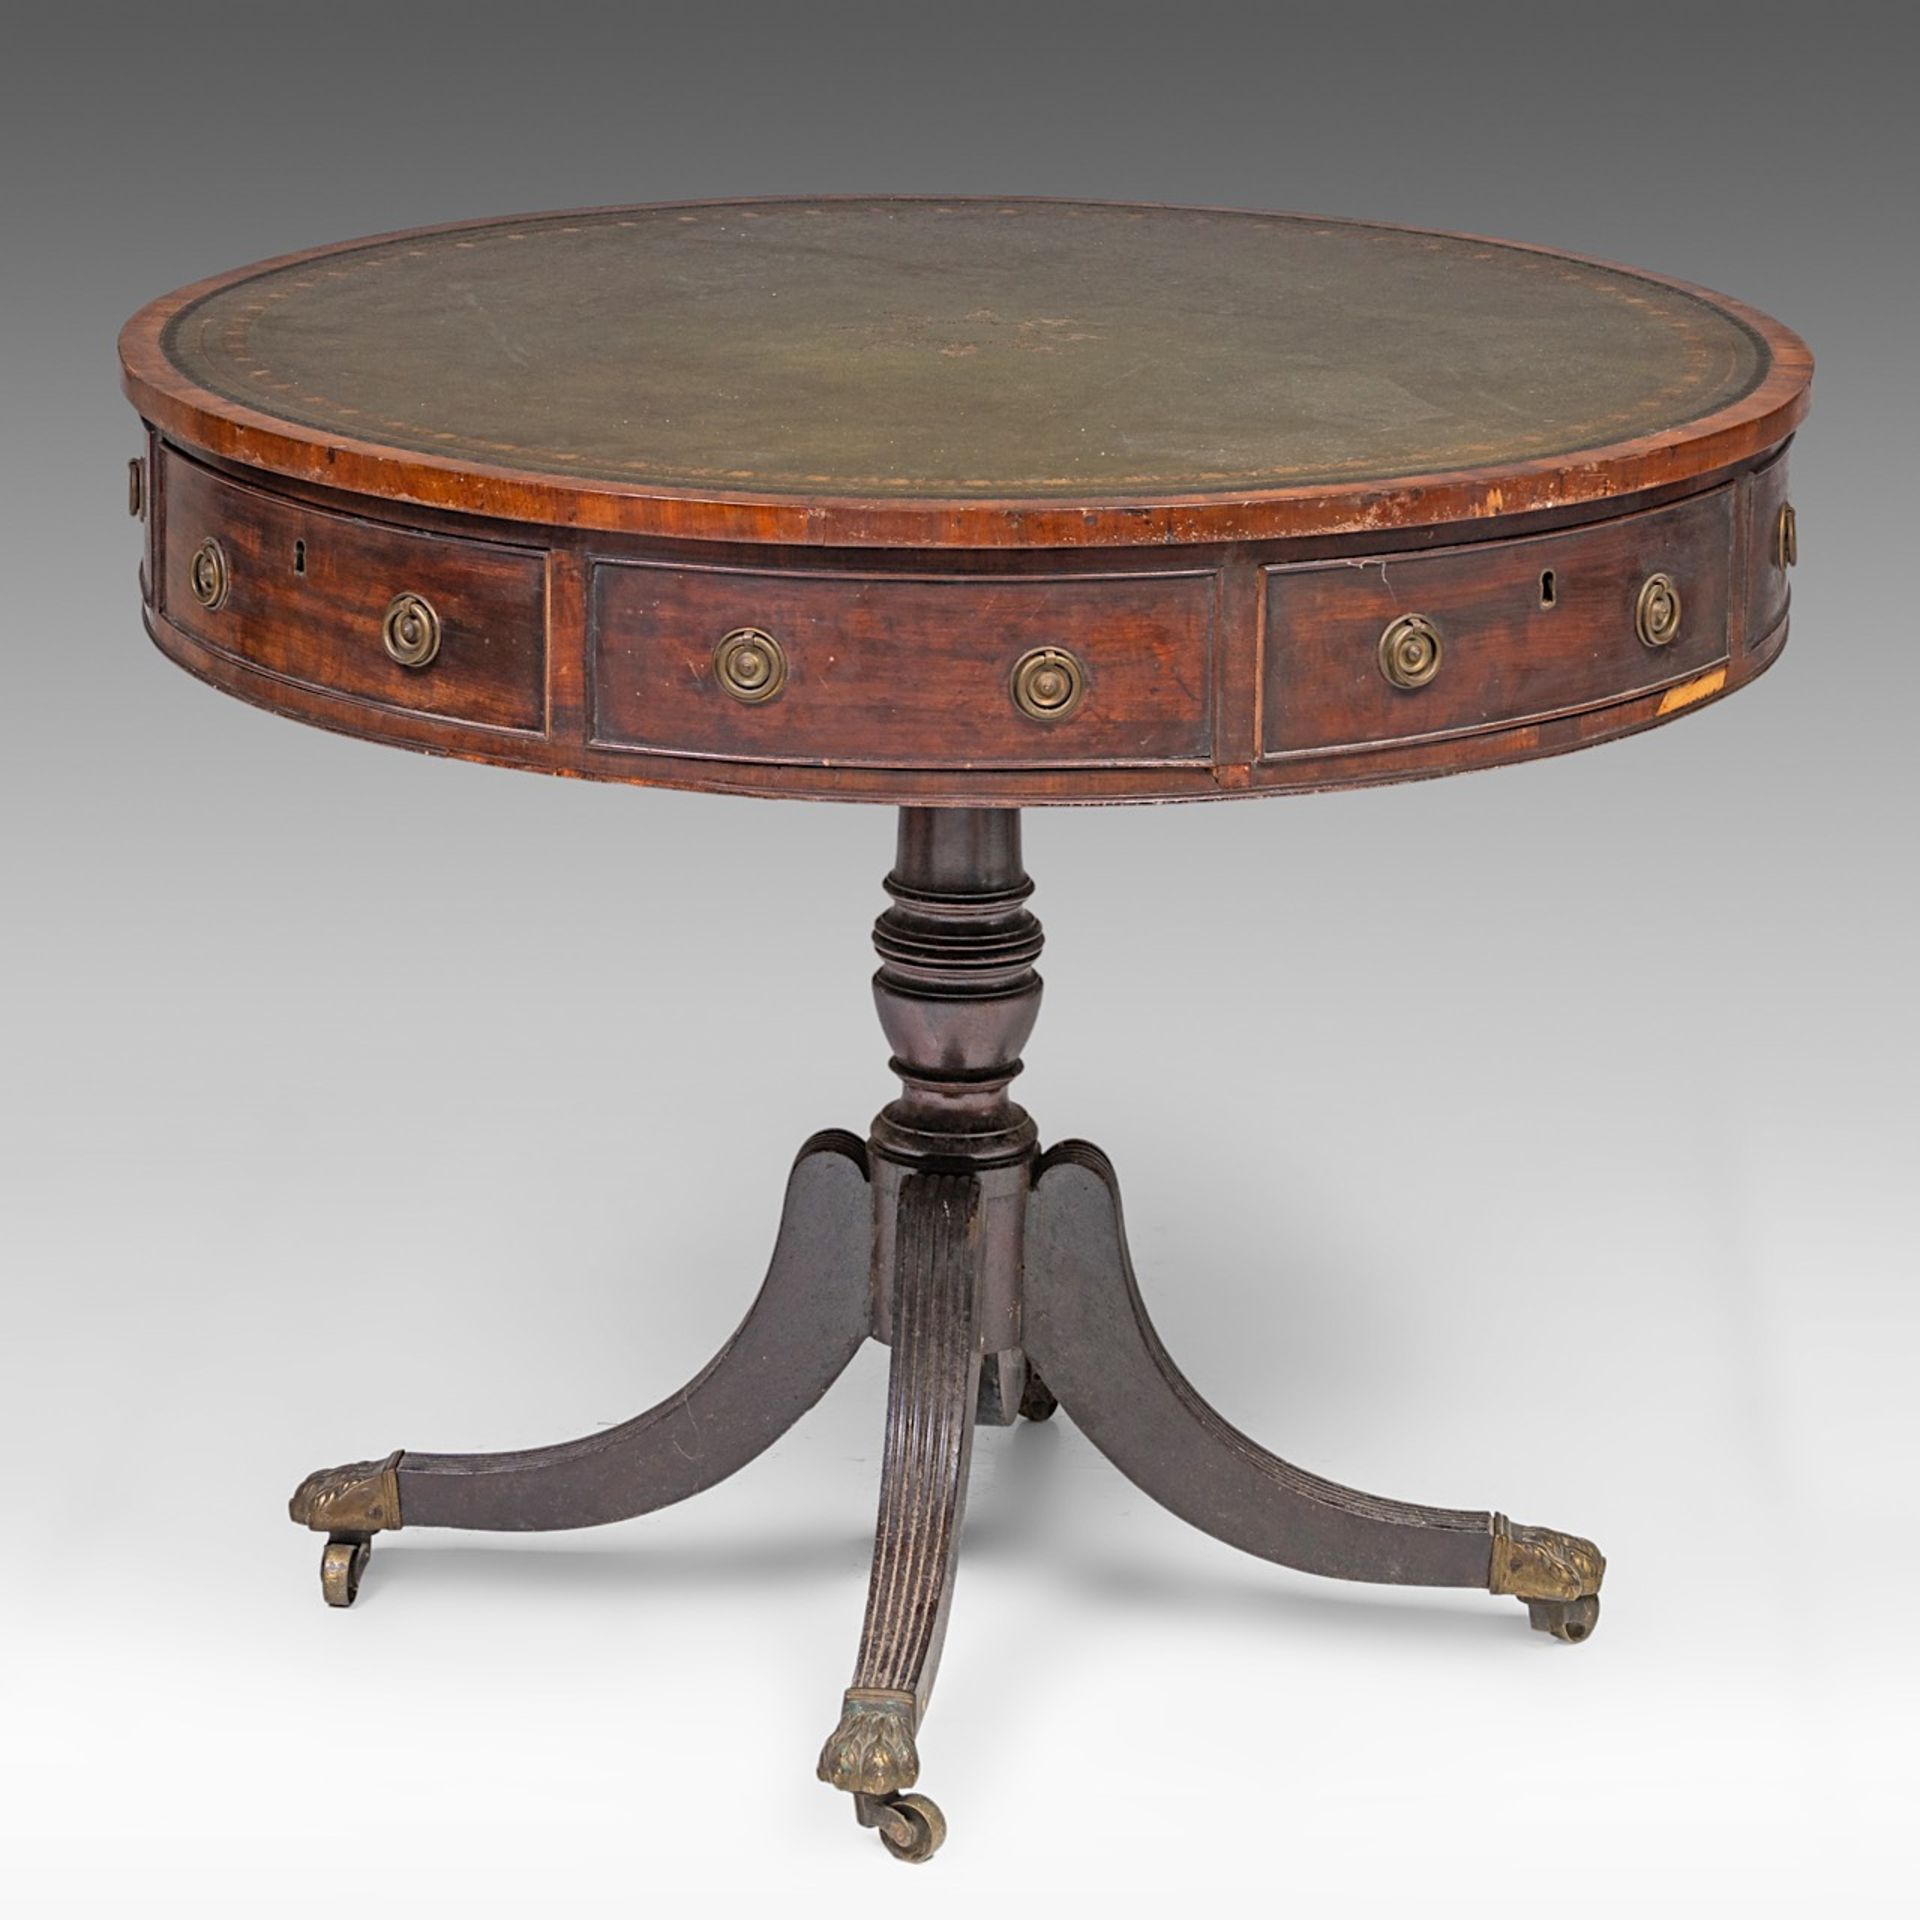 An English revolving drum table, marked with a crowned WR, ca. 1800, H 74 cm - dia 91 cm - Bild 5 aus 9